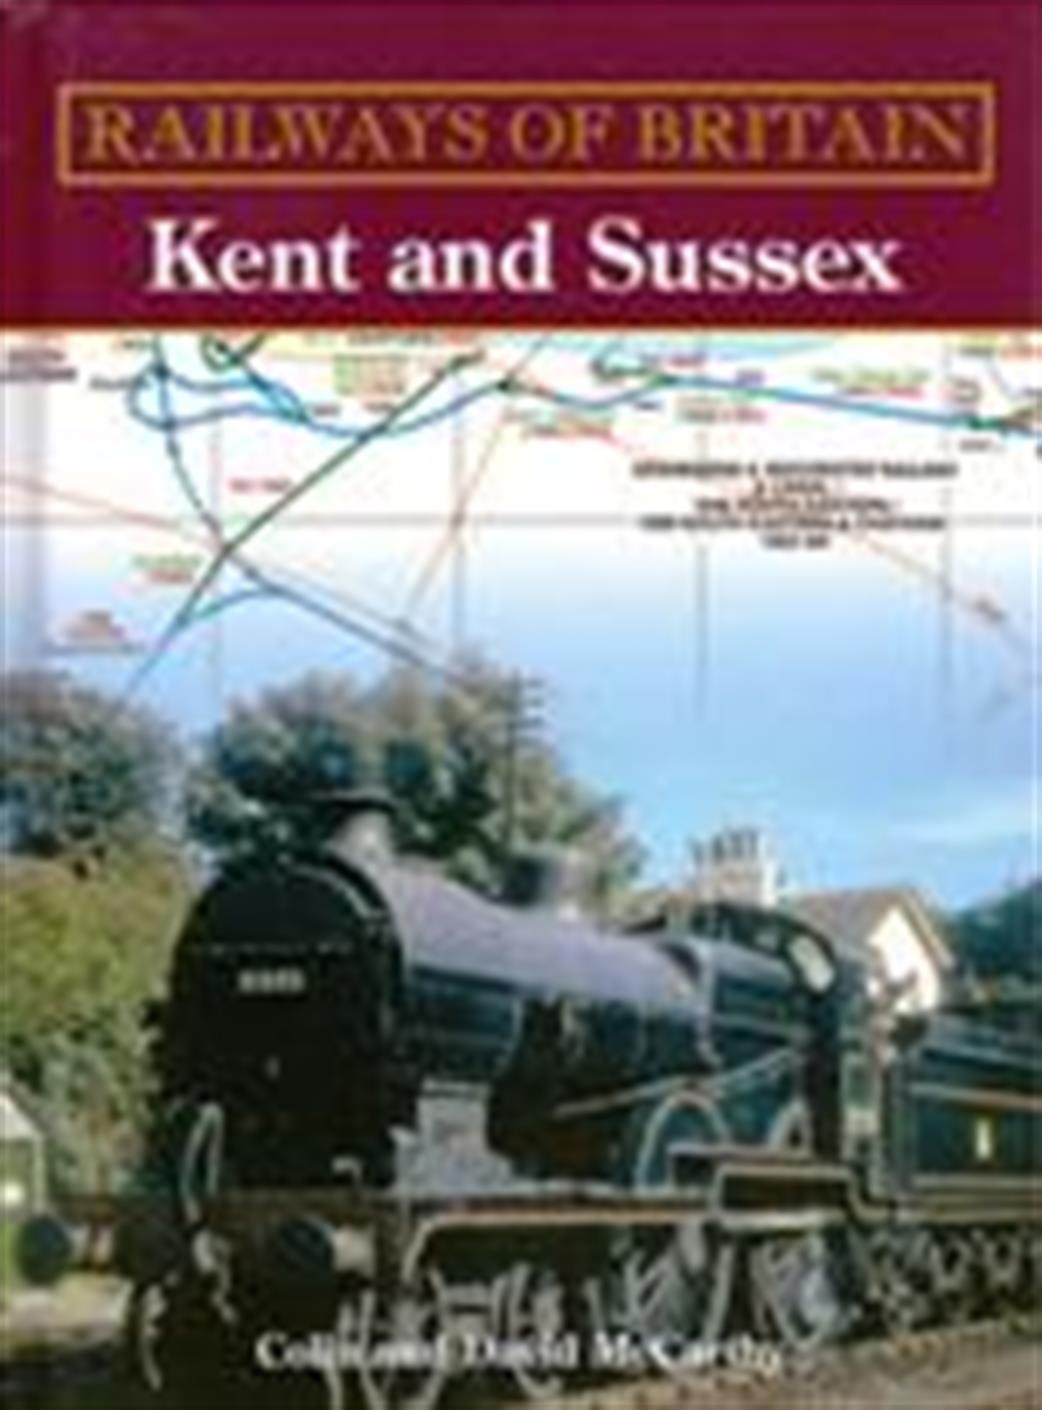 Ian Allan Publishing  9780711032224 Kent and Sussex by Colin & David McCarthy